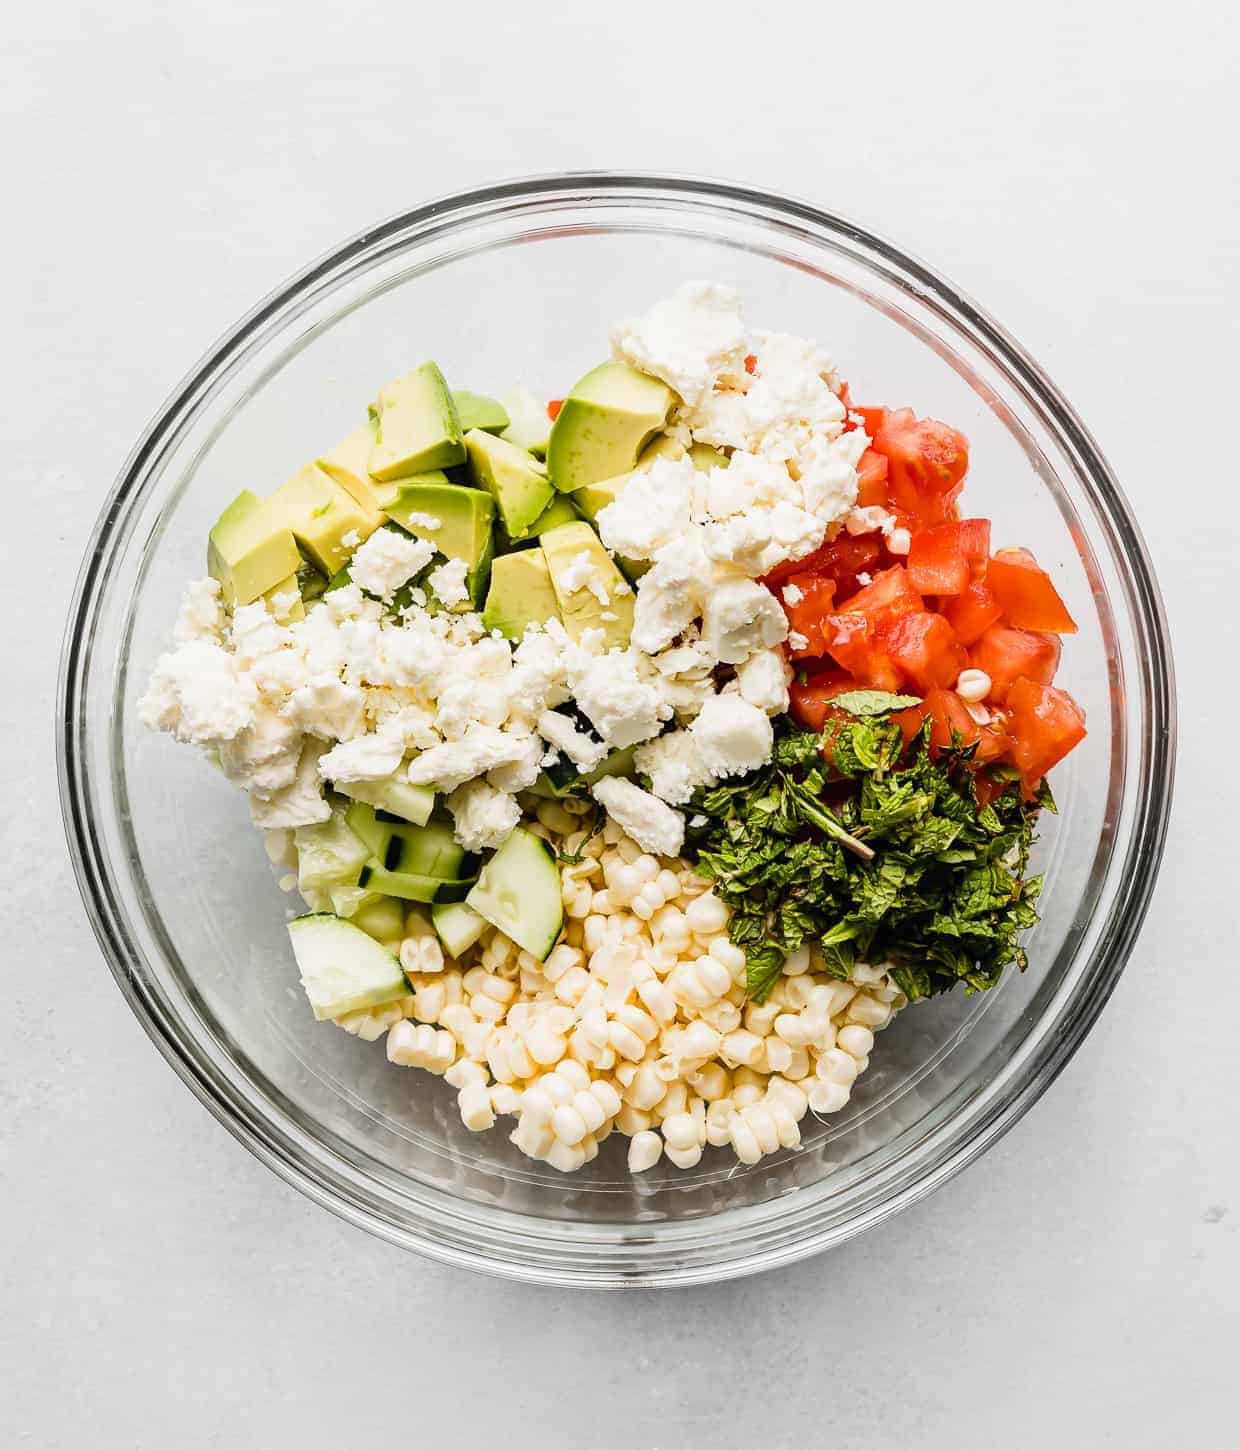 A glass bowl full of corn kernals, diced tomatoes, feta cheese, avocado and mint.